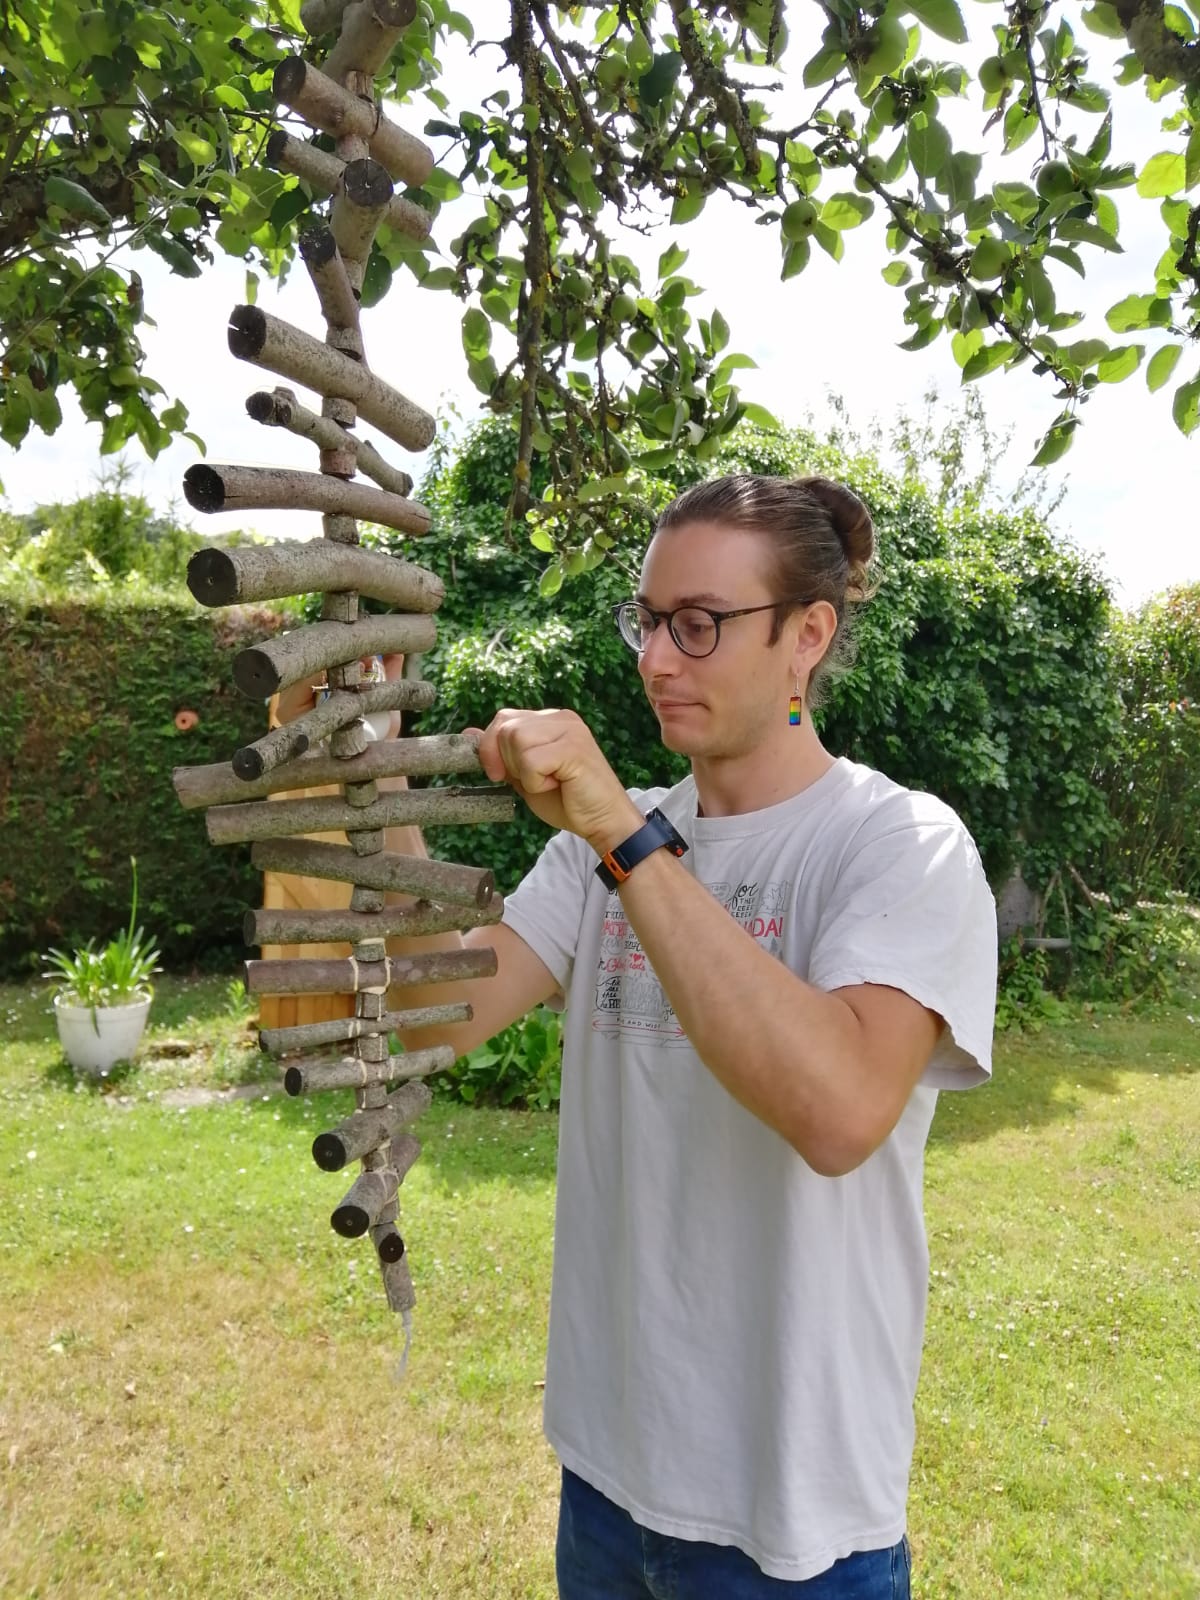 Building a wood structure in a tree